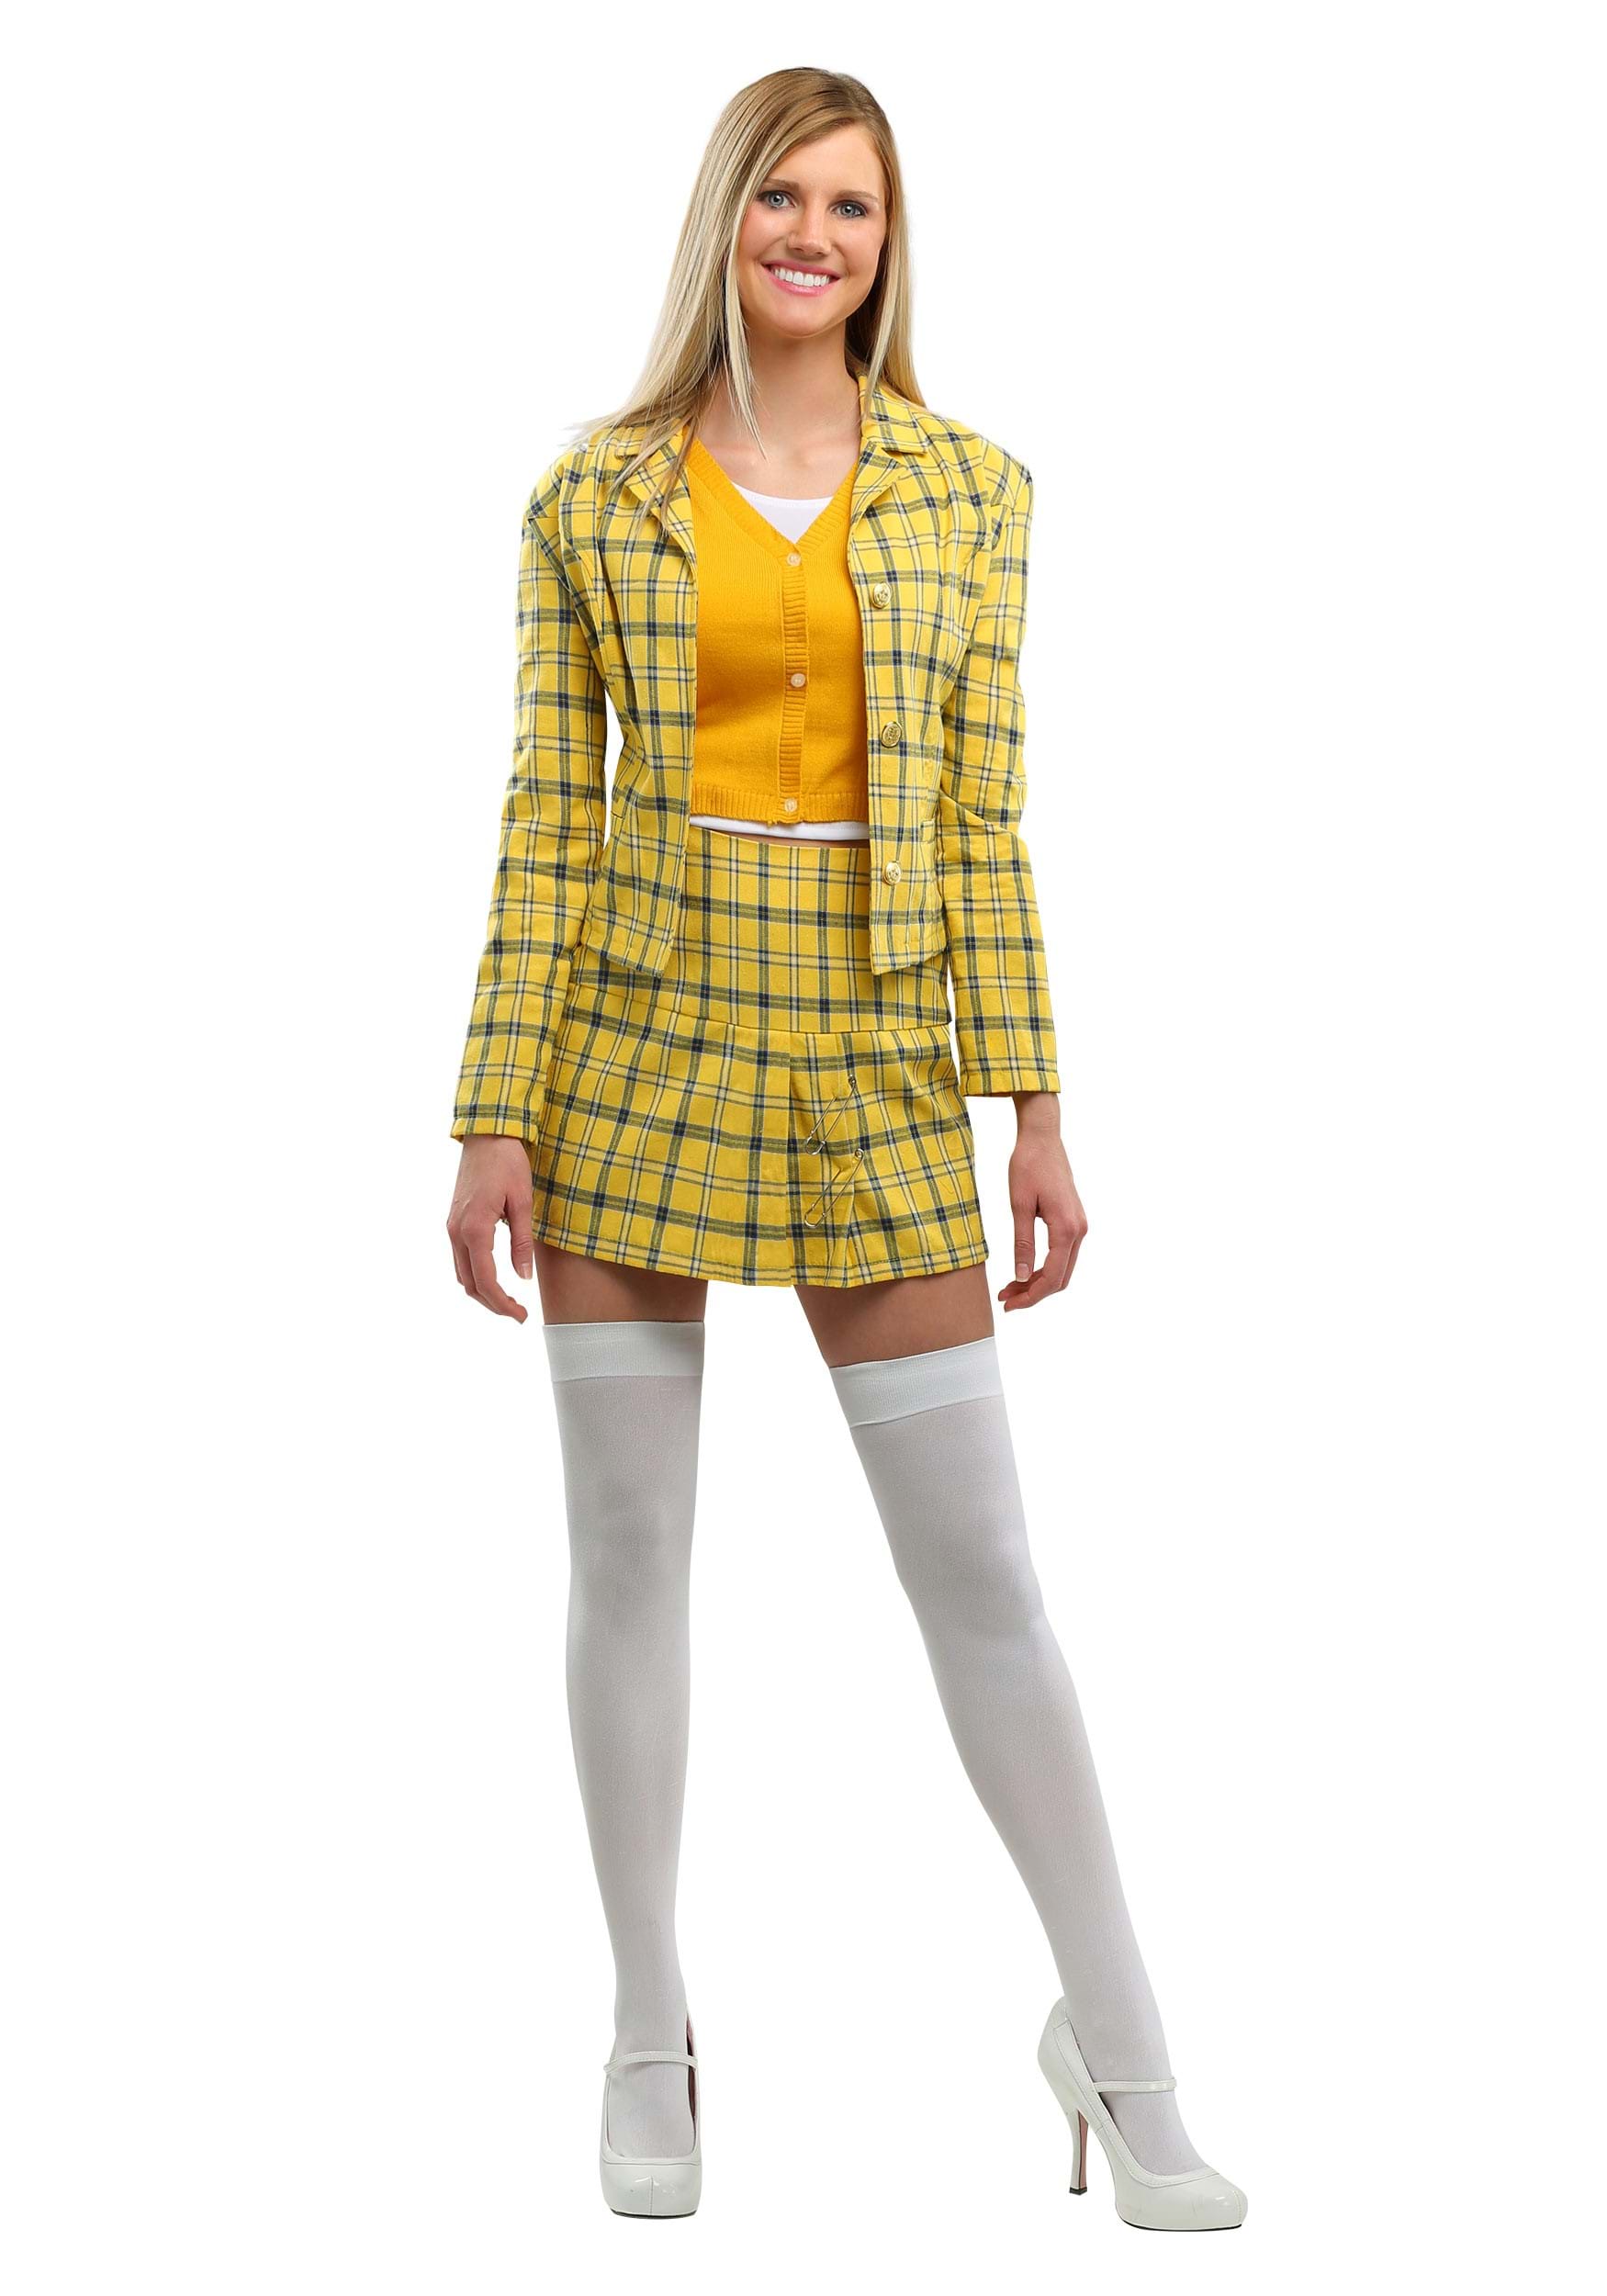 Image of Clueless Cher Plus Size Costume for Women | 90s Movie Costume ID FUN2948PL-1X